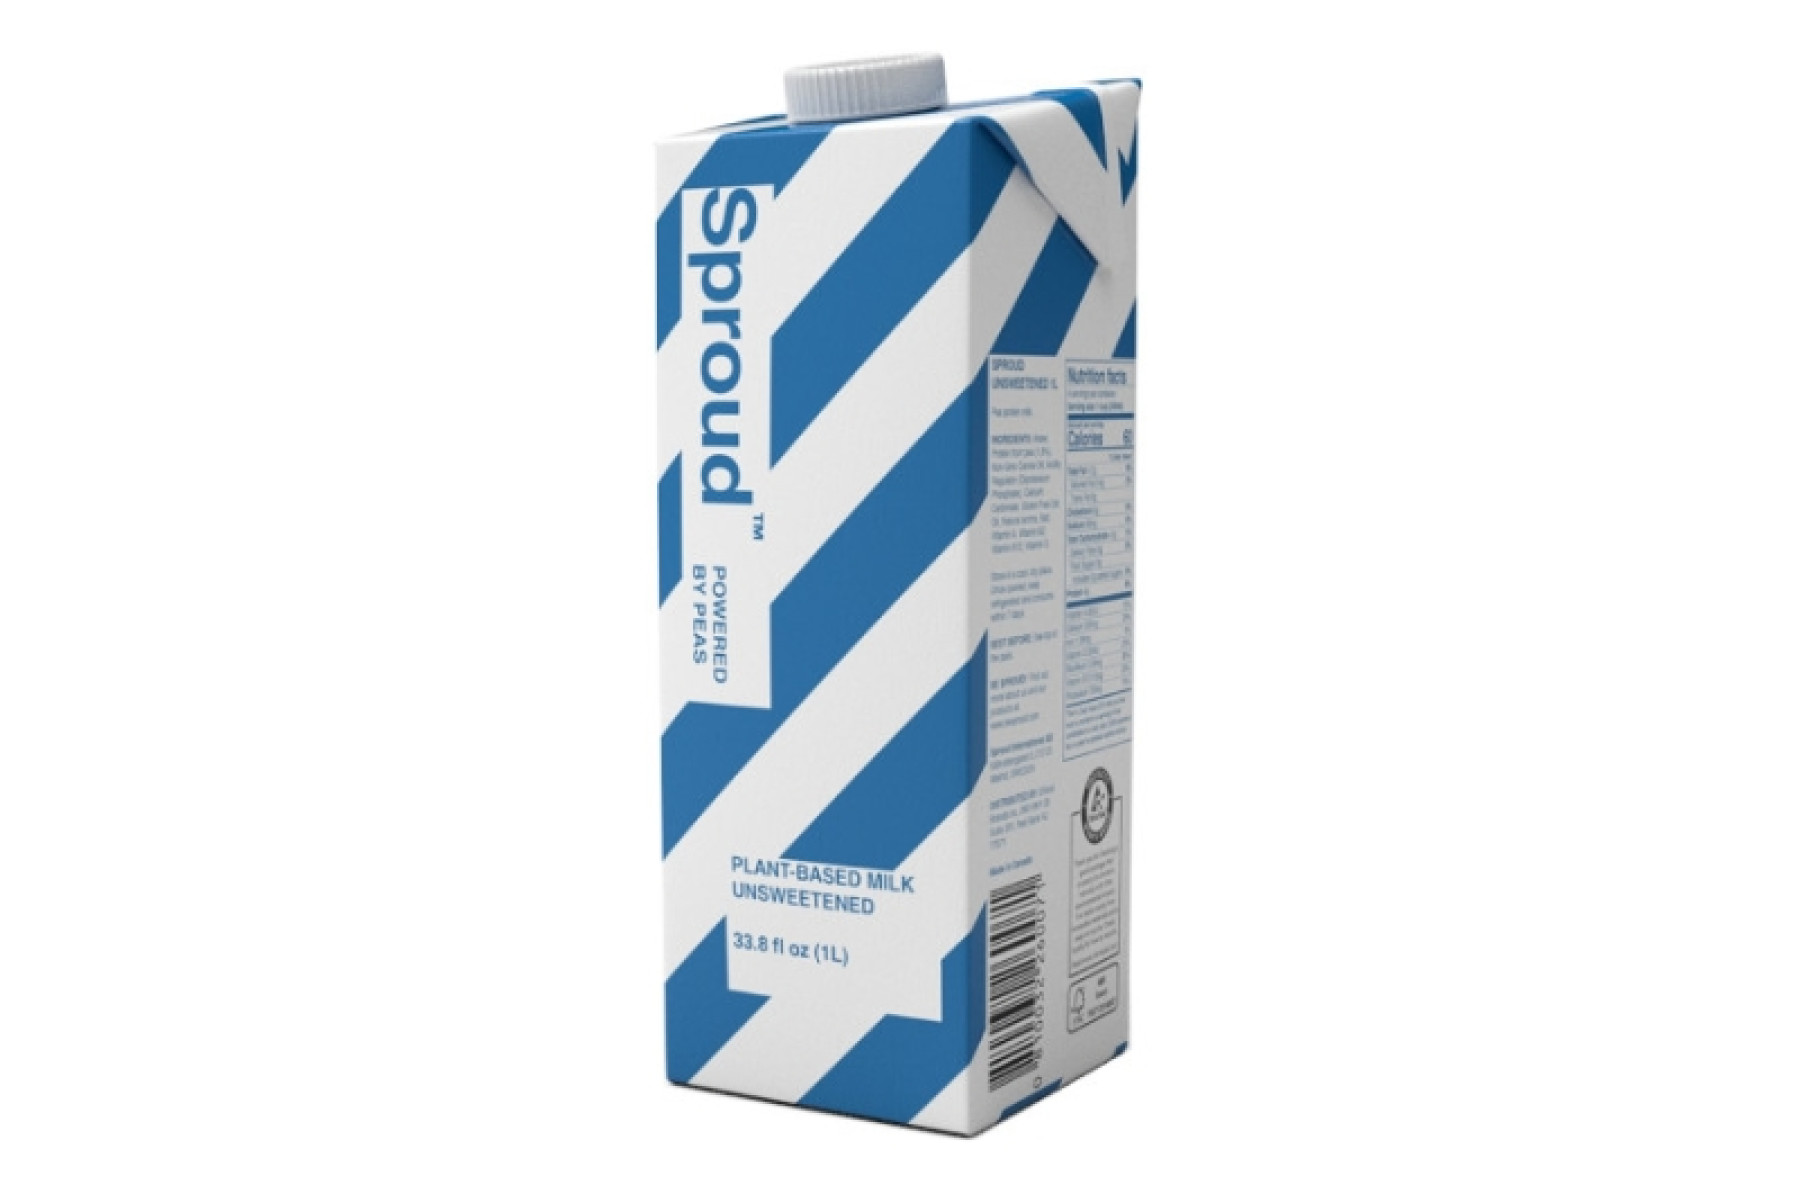 Sproud Unsweetened – Plant based milk substitute (6x1L)